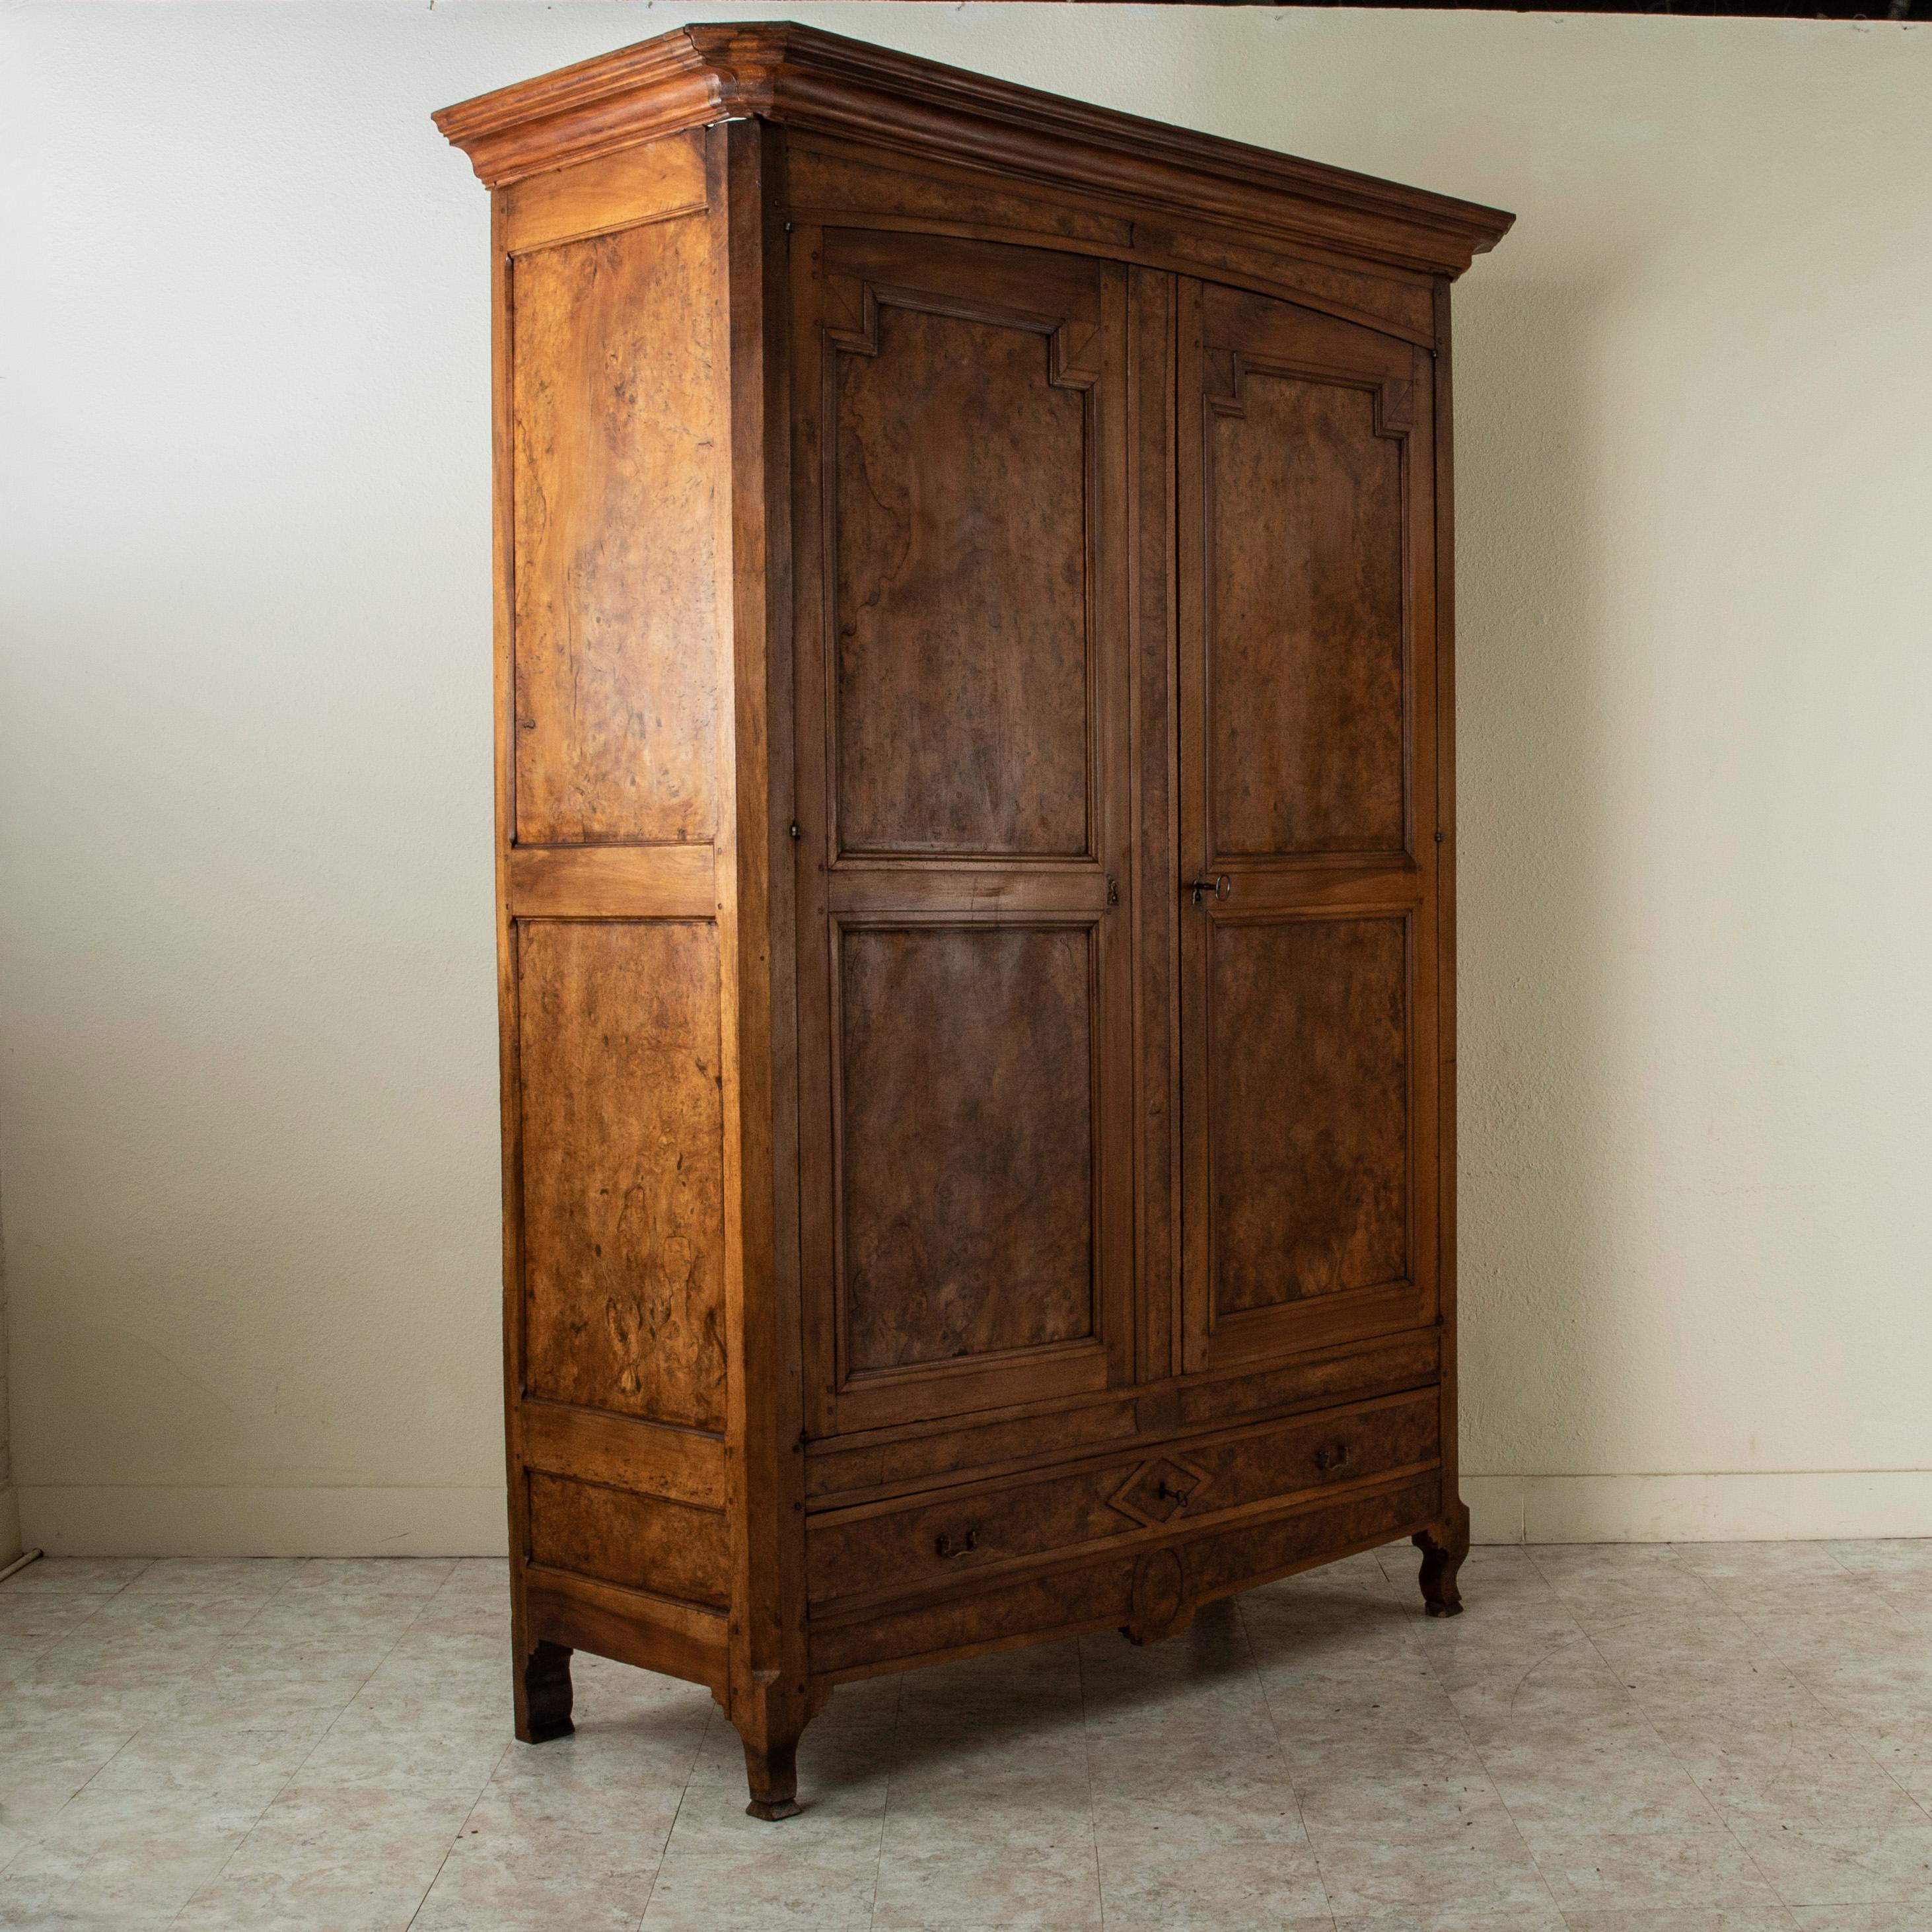 Standing at nearly 8.5 feet in height, this early nineteenth century armoire is constructed of hand begged paneled sides and doors of solid elm. It features its original hand forged iron lock and key on the right hand door and an intricately hand